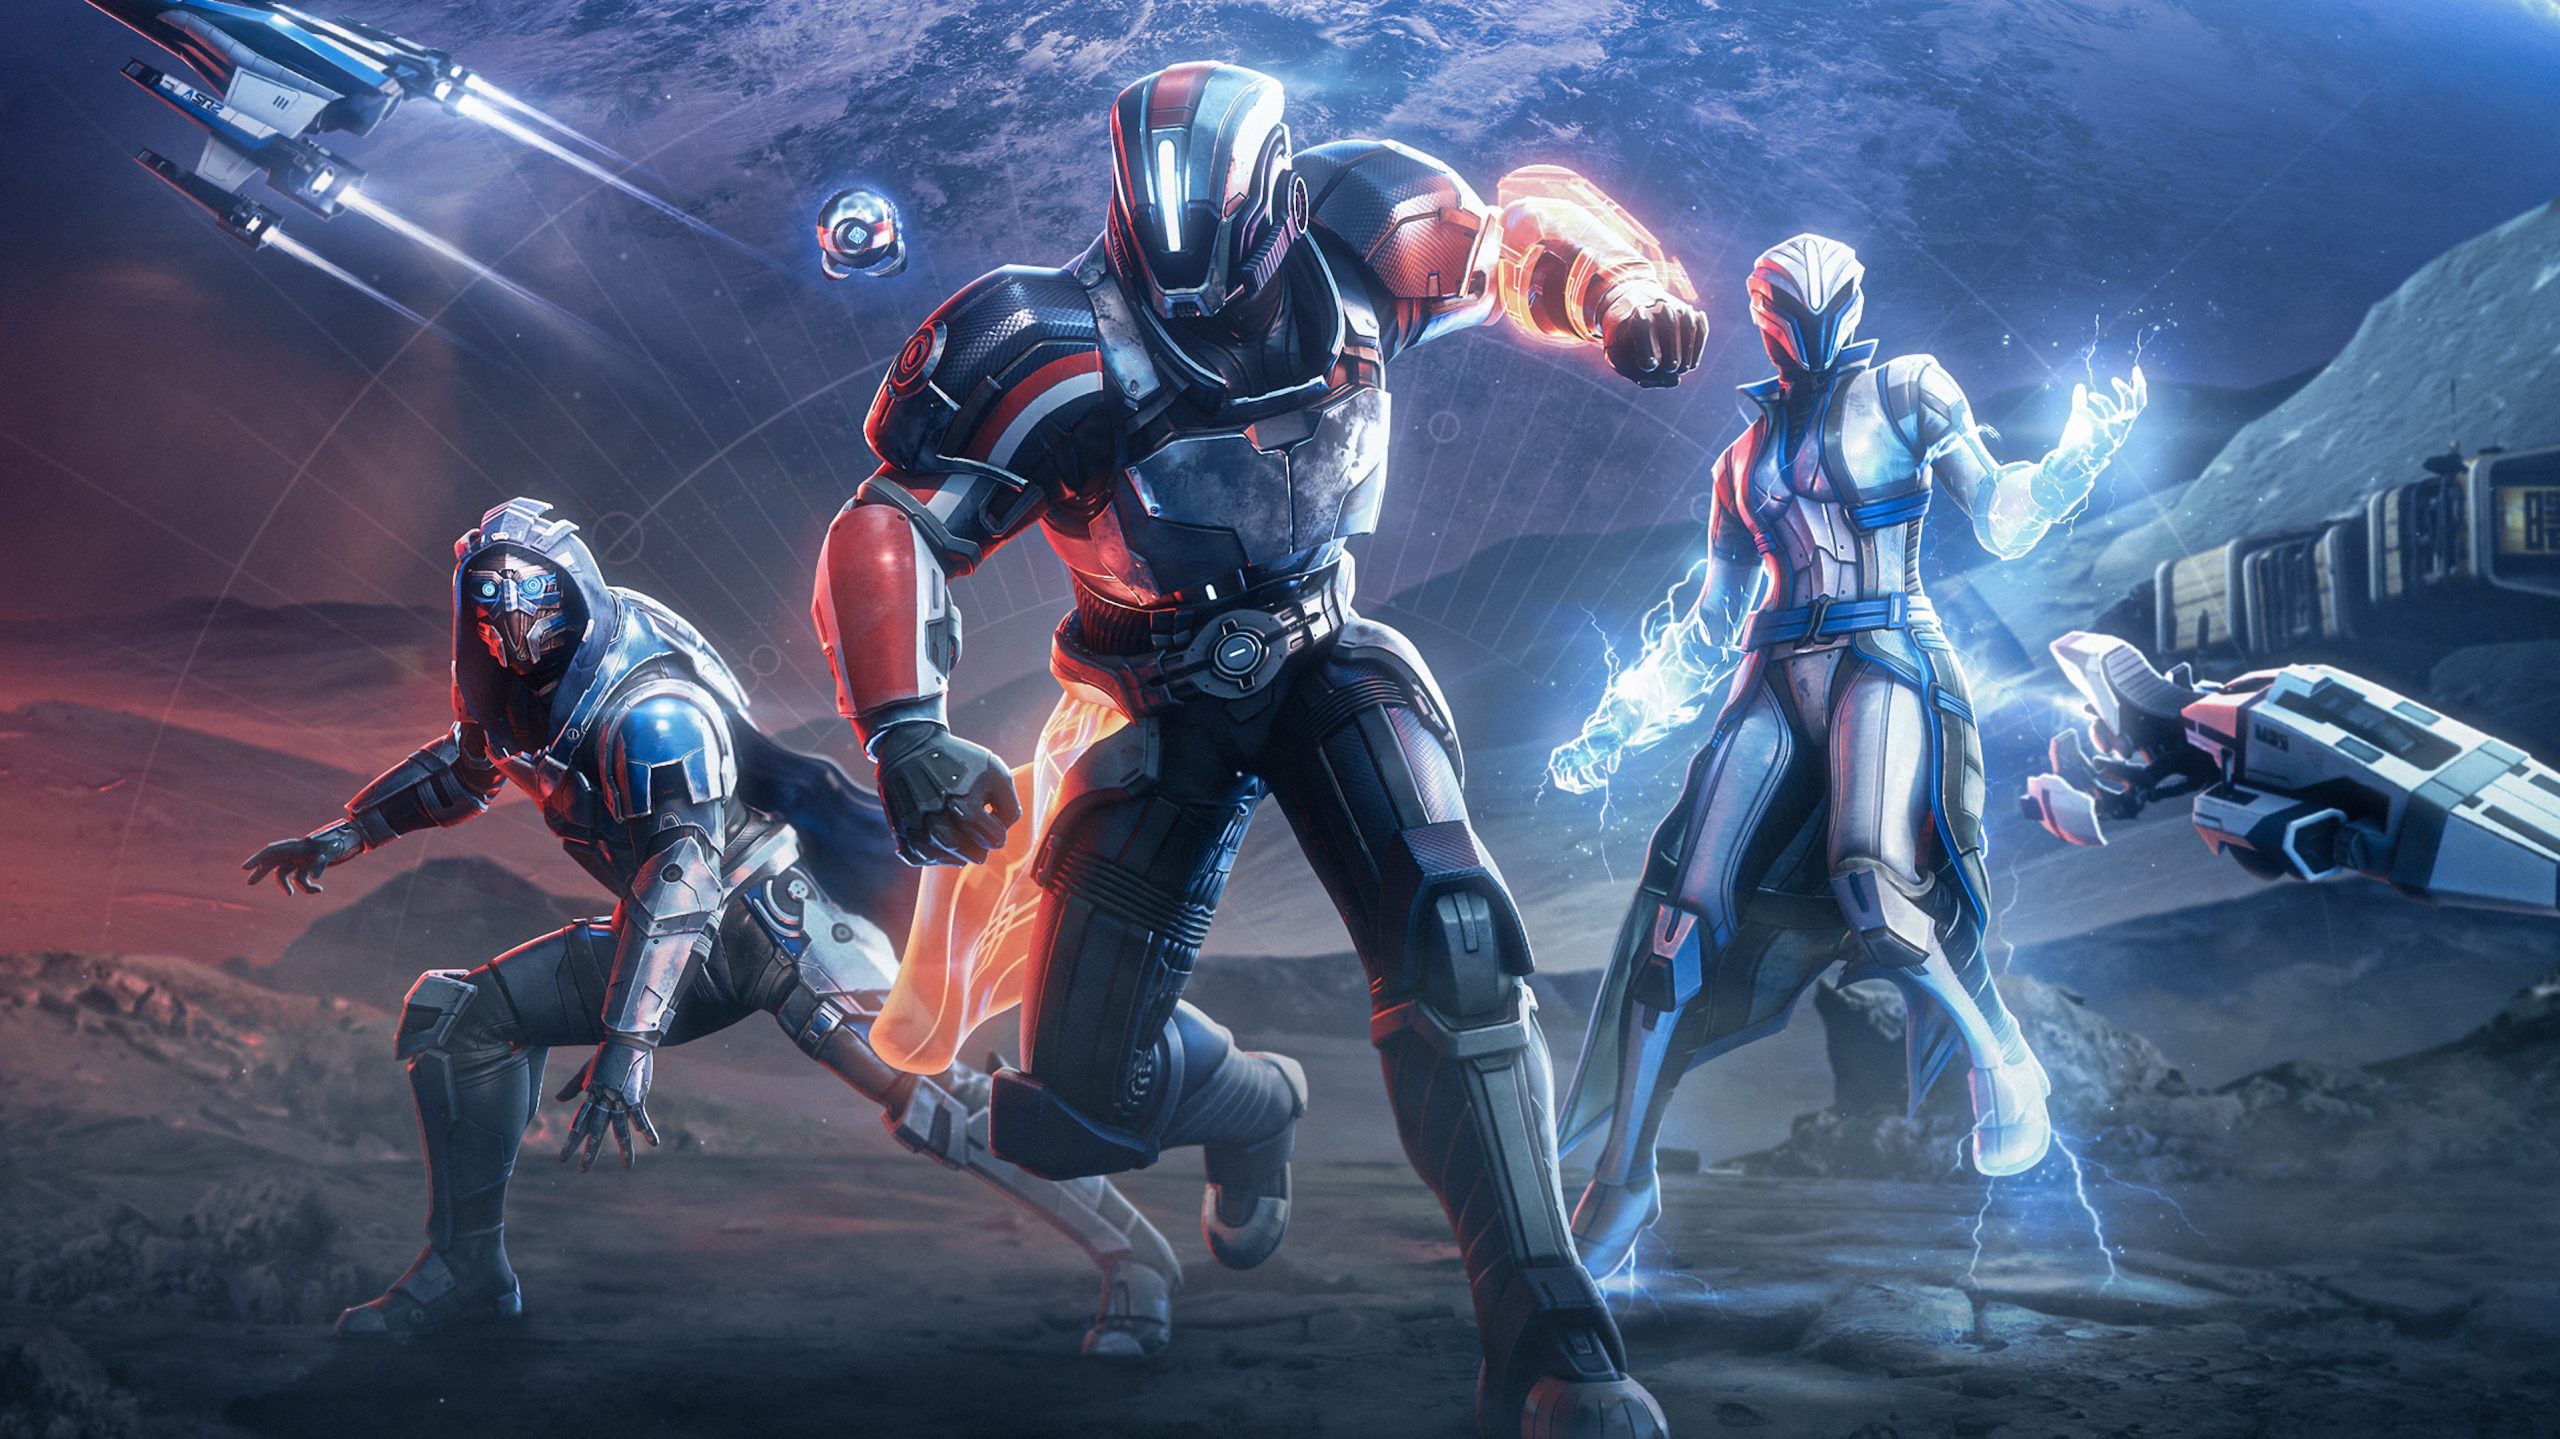 Bungie hopes Destiny 2’s new Mass Effect armor sets will be your favorite cosmetics on The Tower